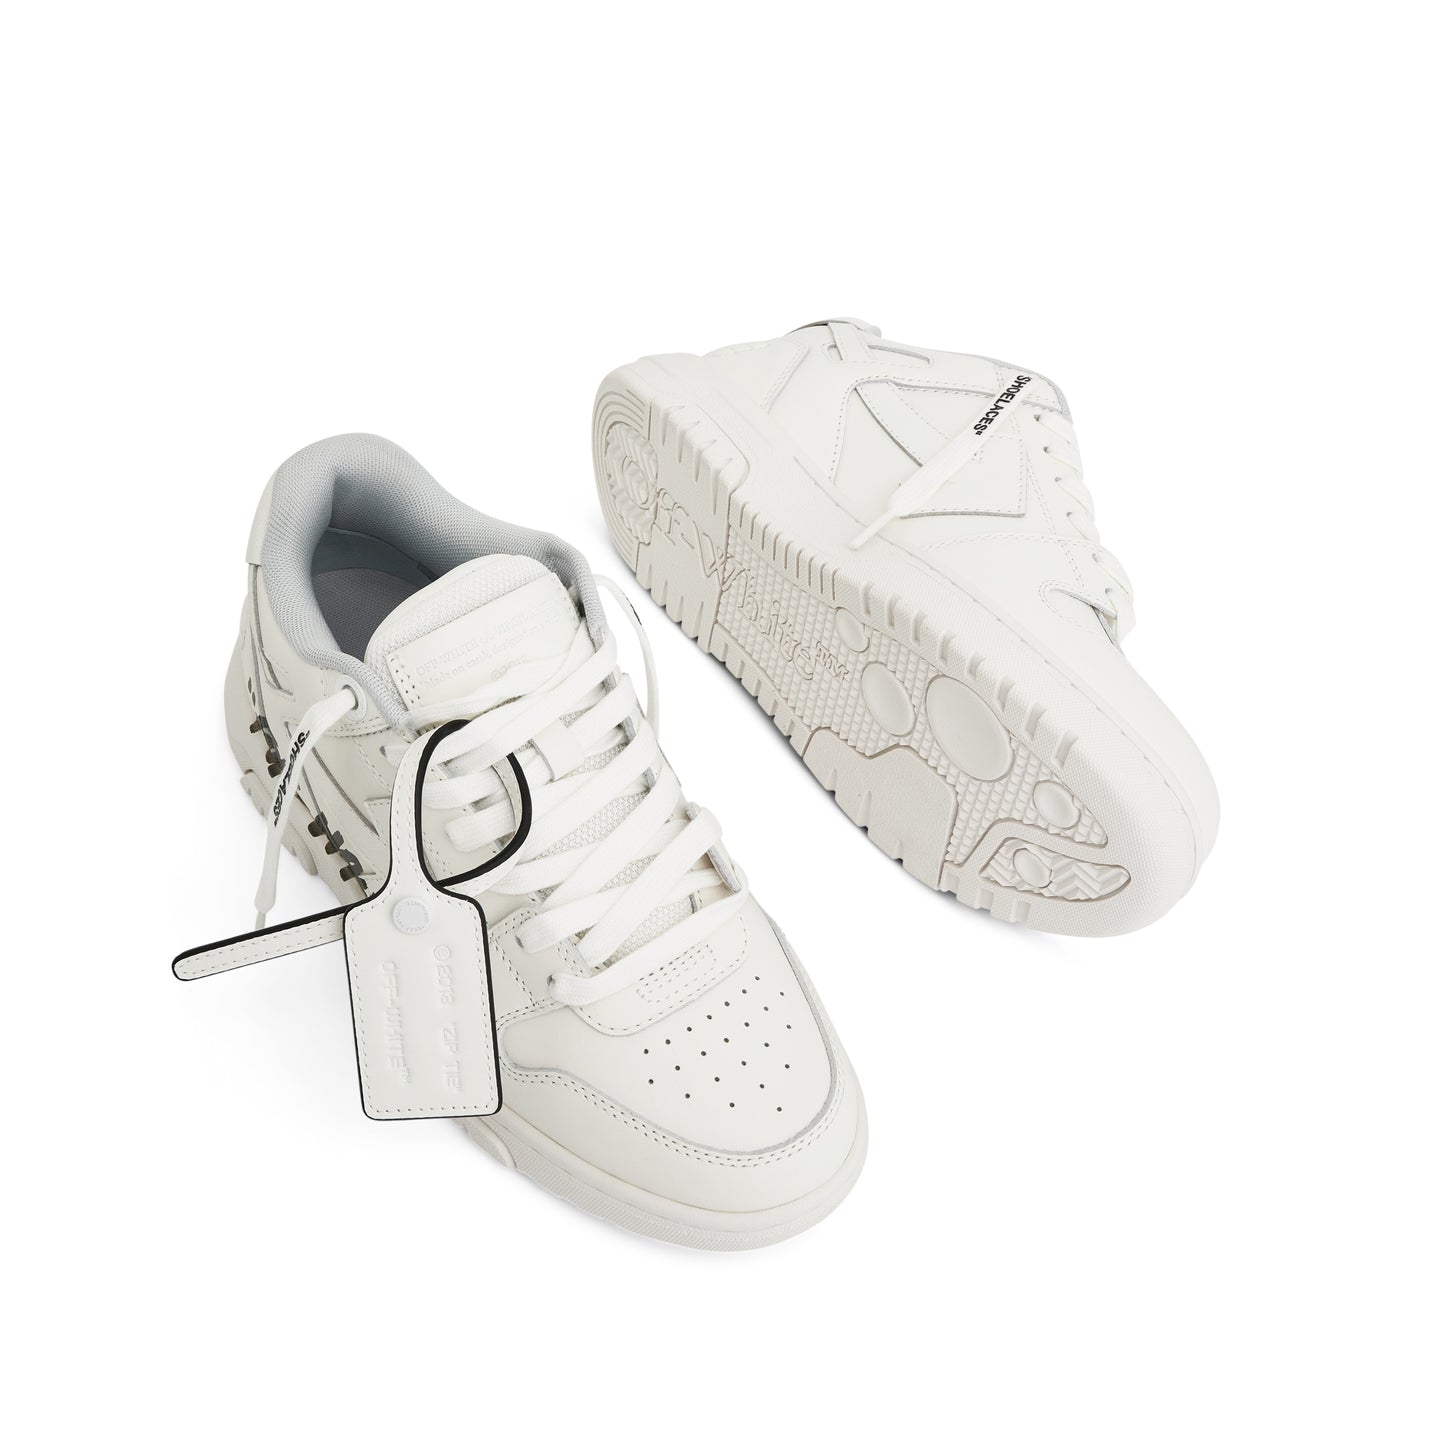 Out of Office "For WALKING" Leather Sneaker in White/Black